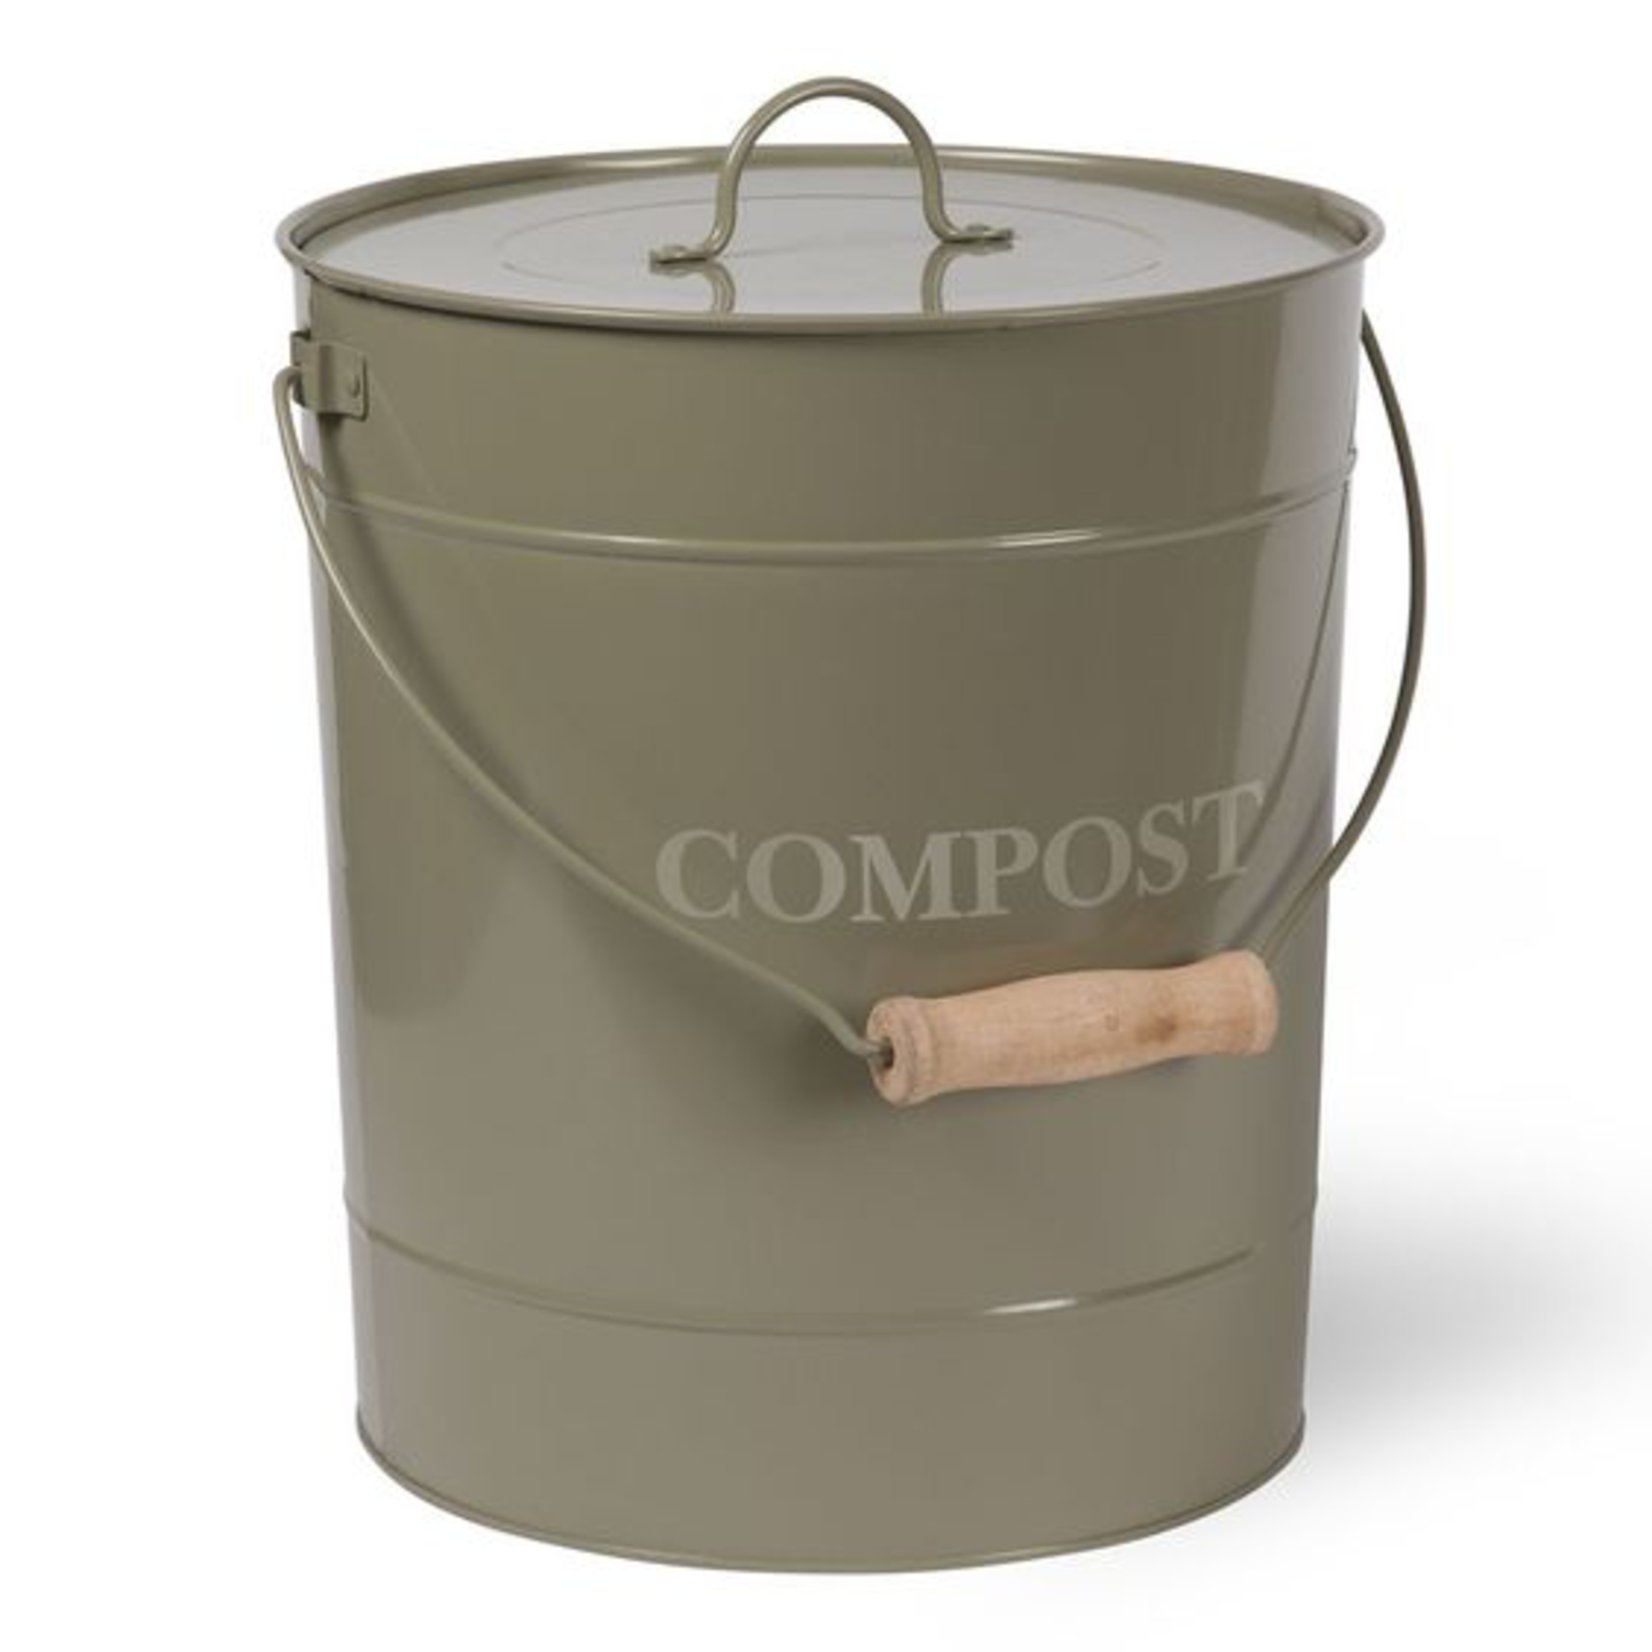 GT DISCOUNTED Large Compost Bin in Gooseberry - marked